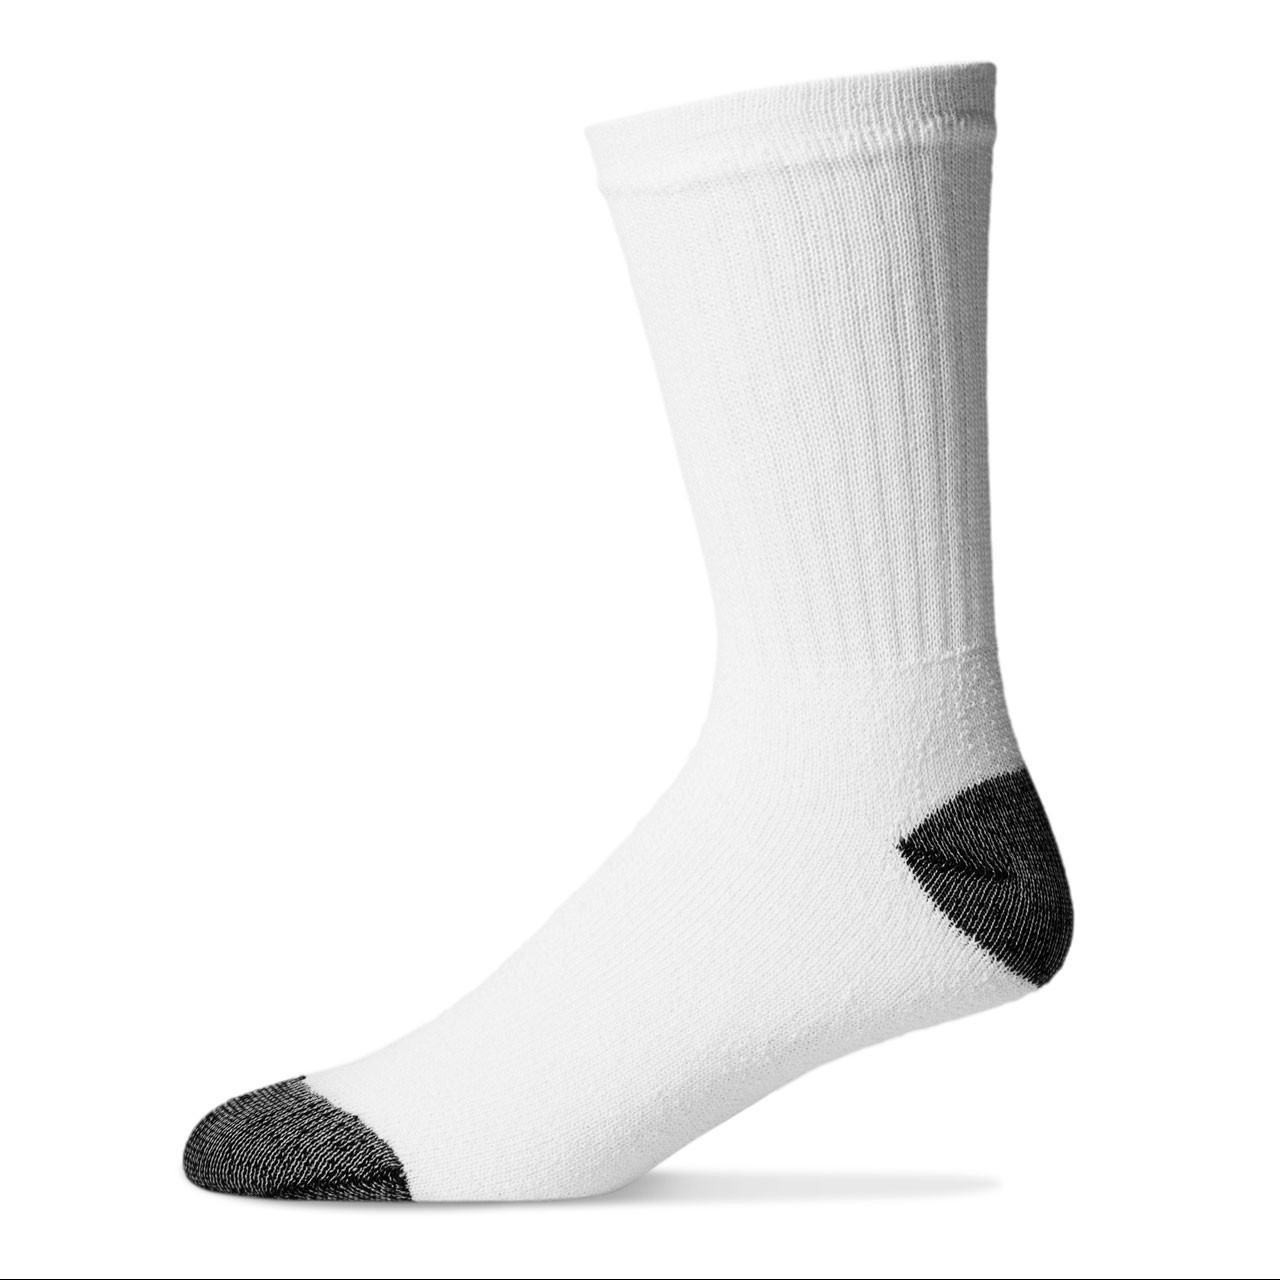 Pack of 2 pairs of ballerina socks in cotton mix, black + white